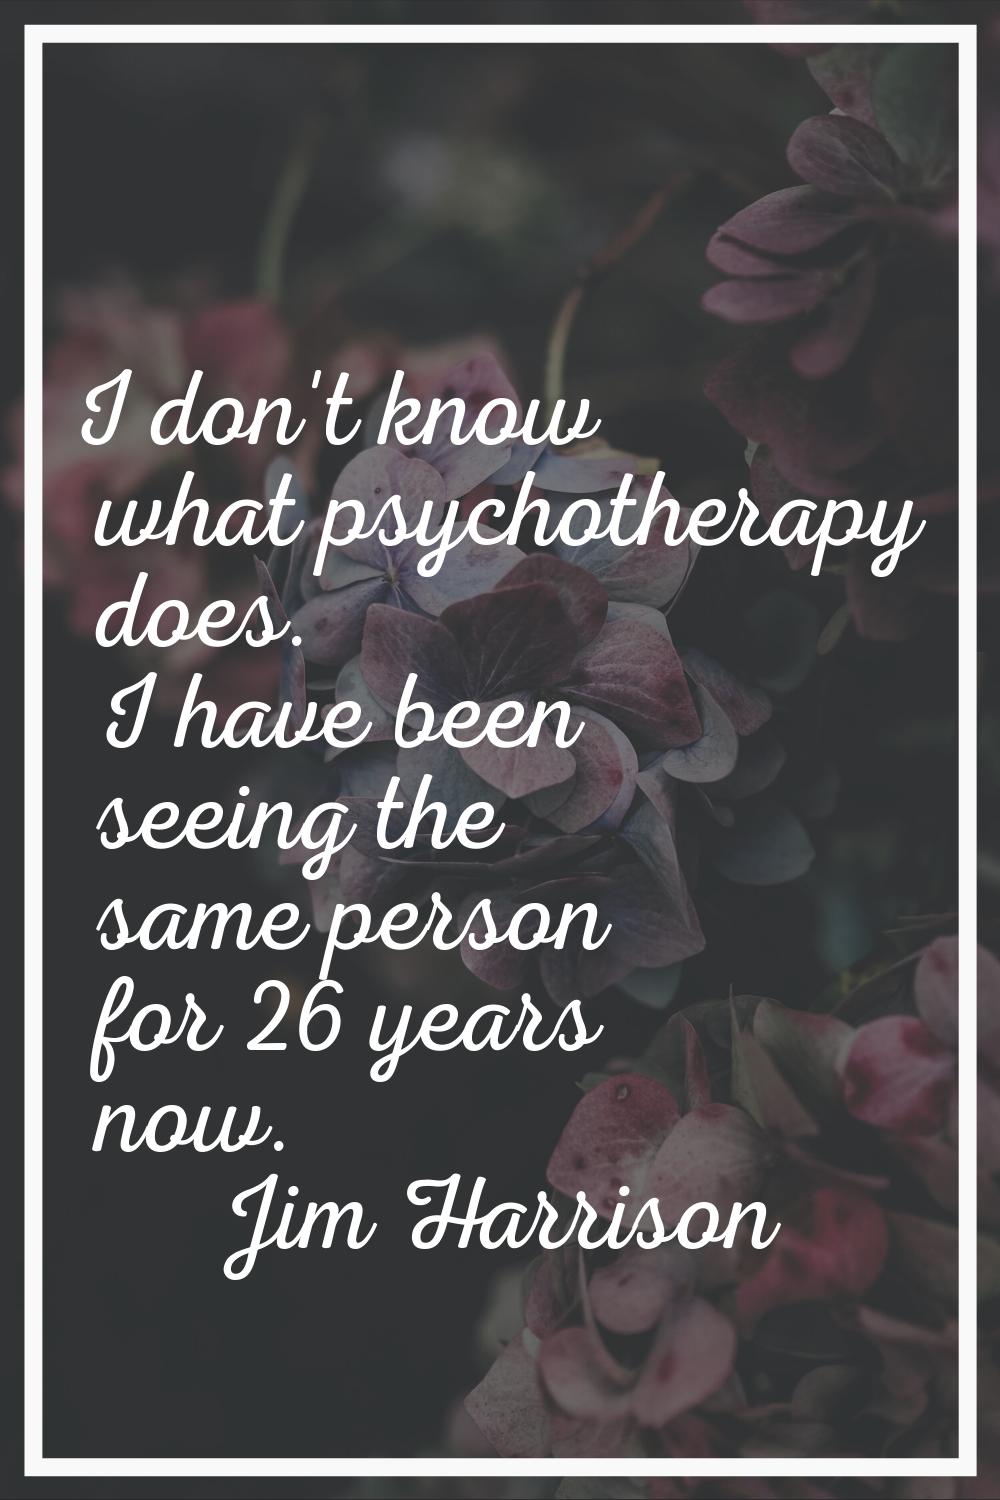 I don't know what psychotherapy does. I have been seeing the same person for 26 years now.